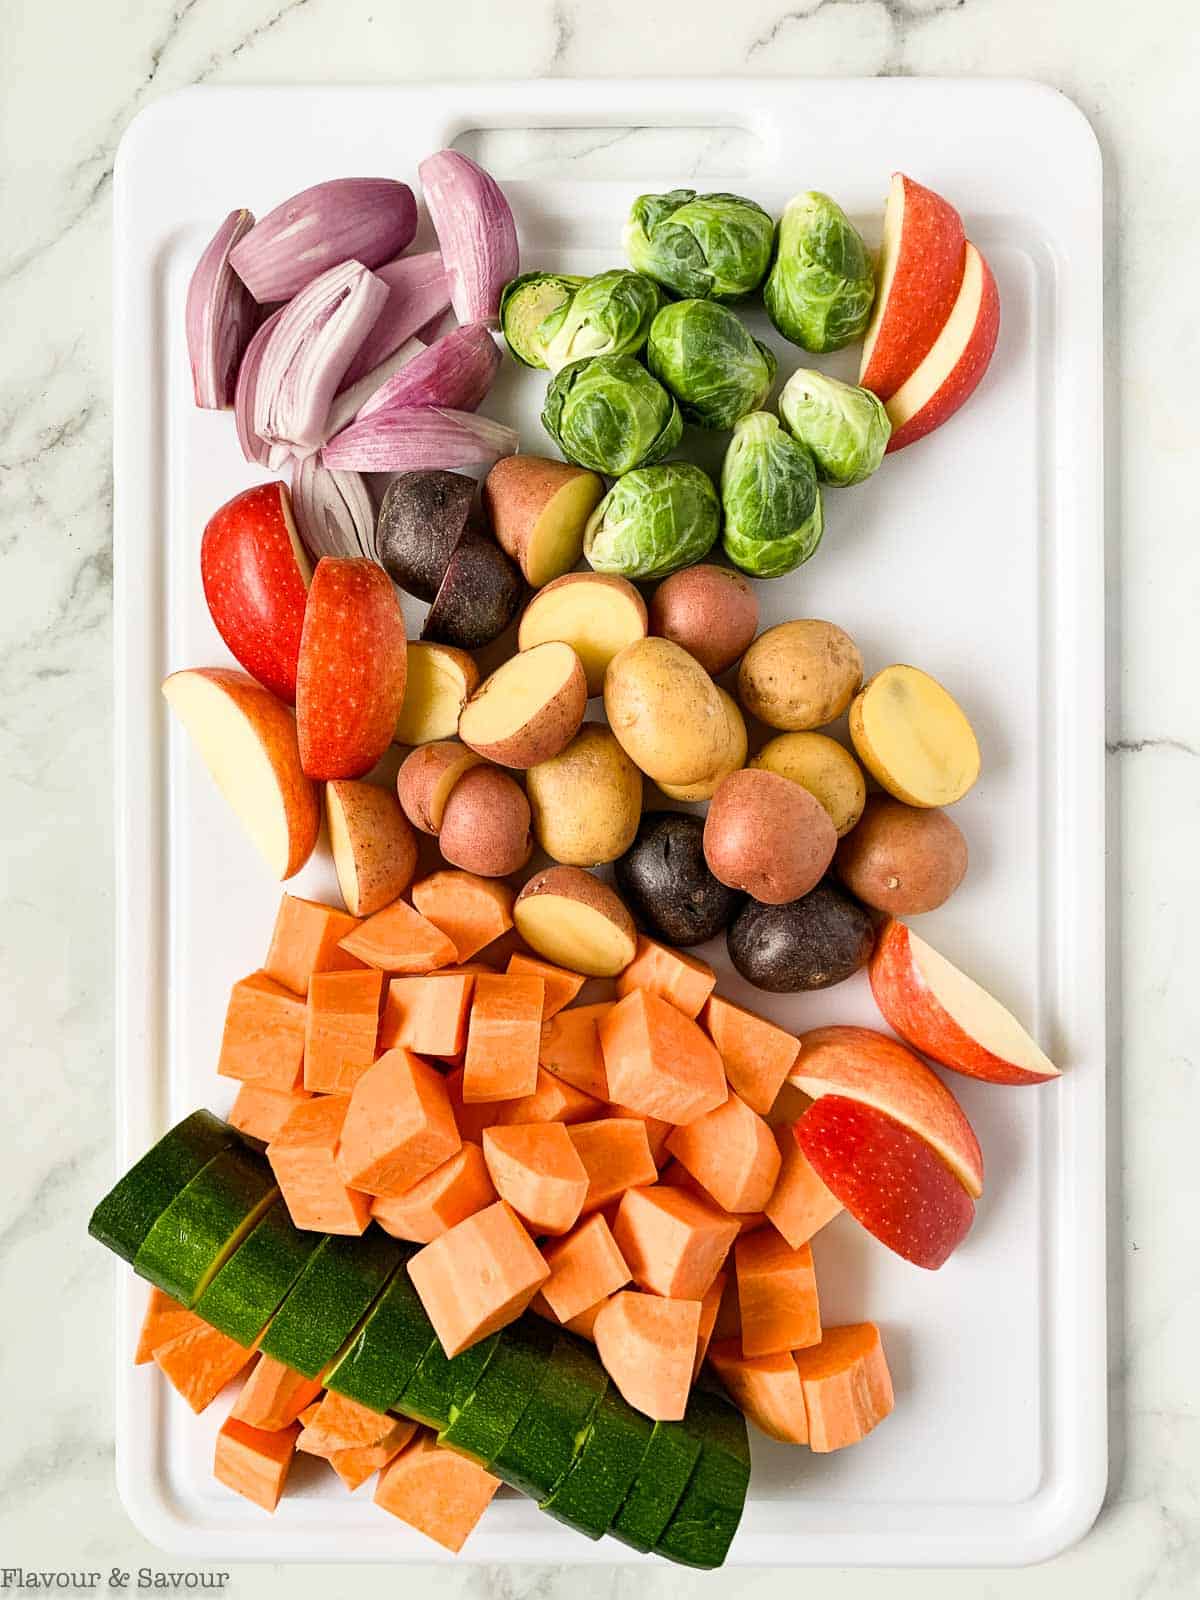 Cut vegetables for roasting on a sheet pan.